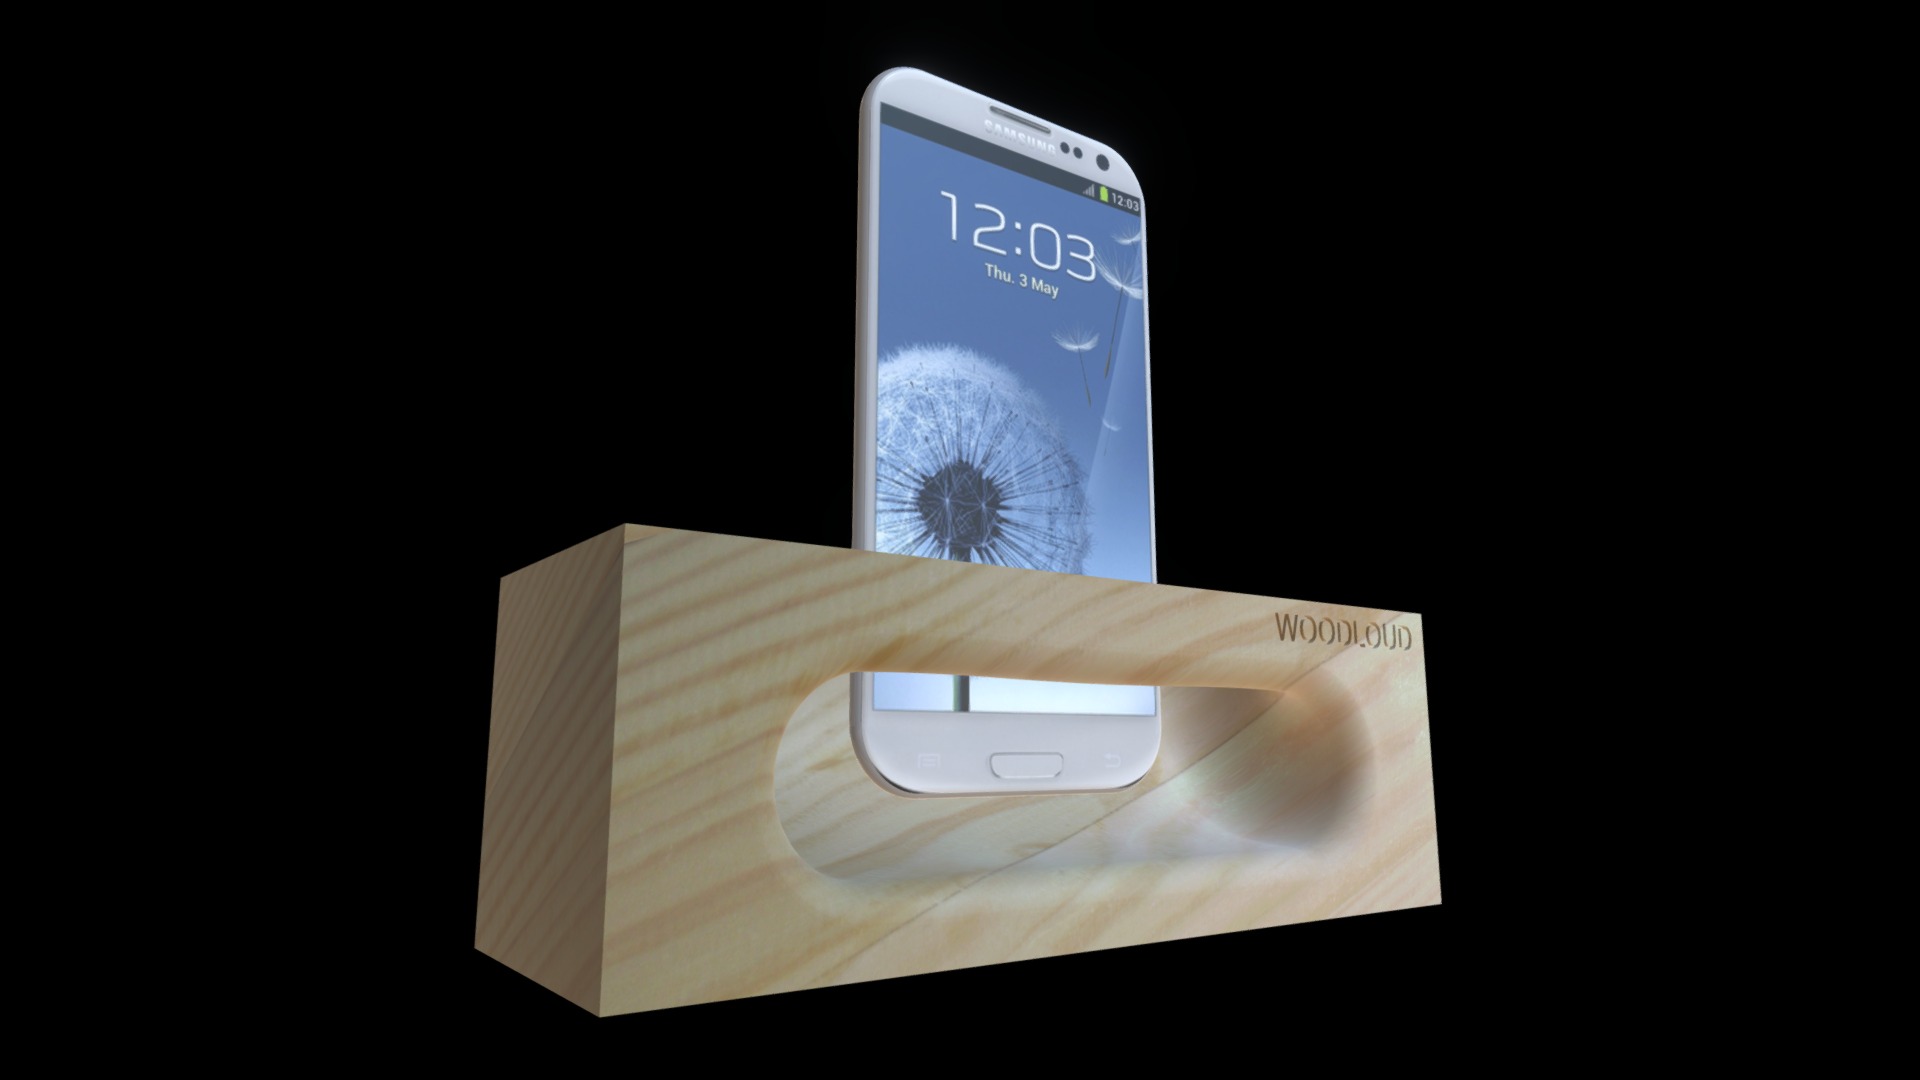 3D model Woodloud - This is a 3D model of the Woodloud. The 3D model is about a cell phone on a box.